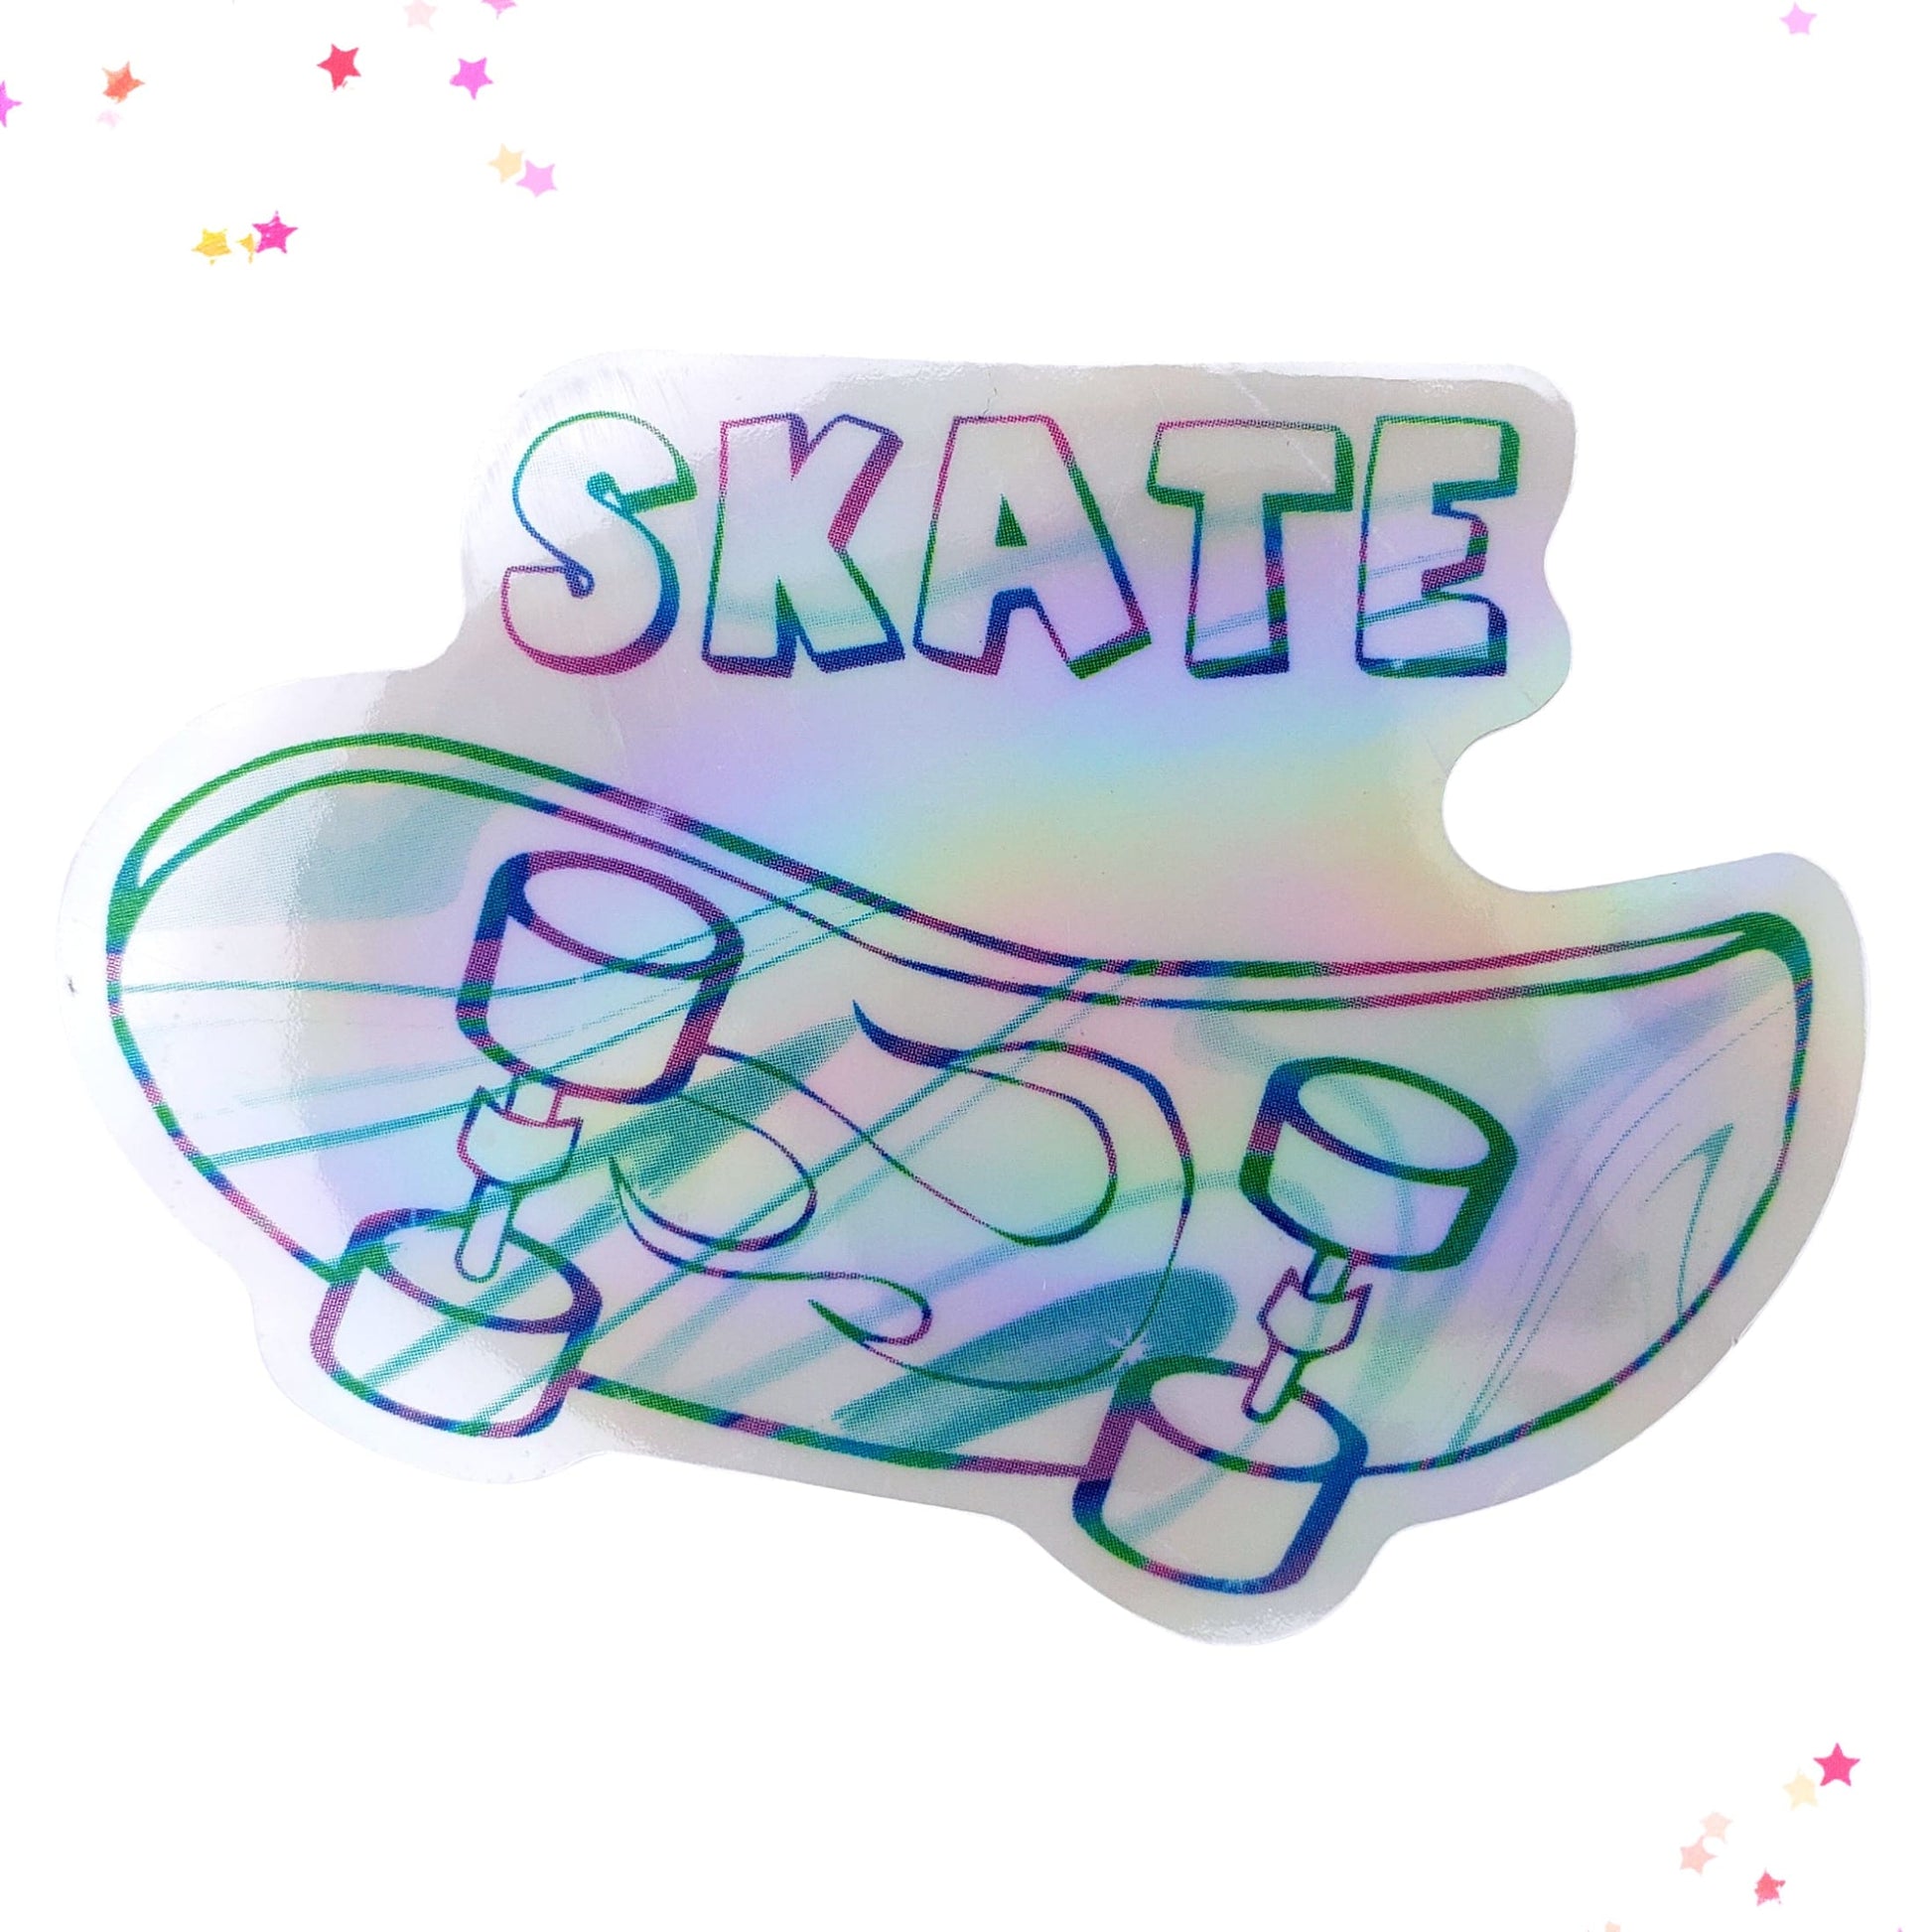 Skate Skateboard Waterproof Holographic Sticker from Confetti Kitty, Only 1.0